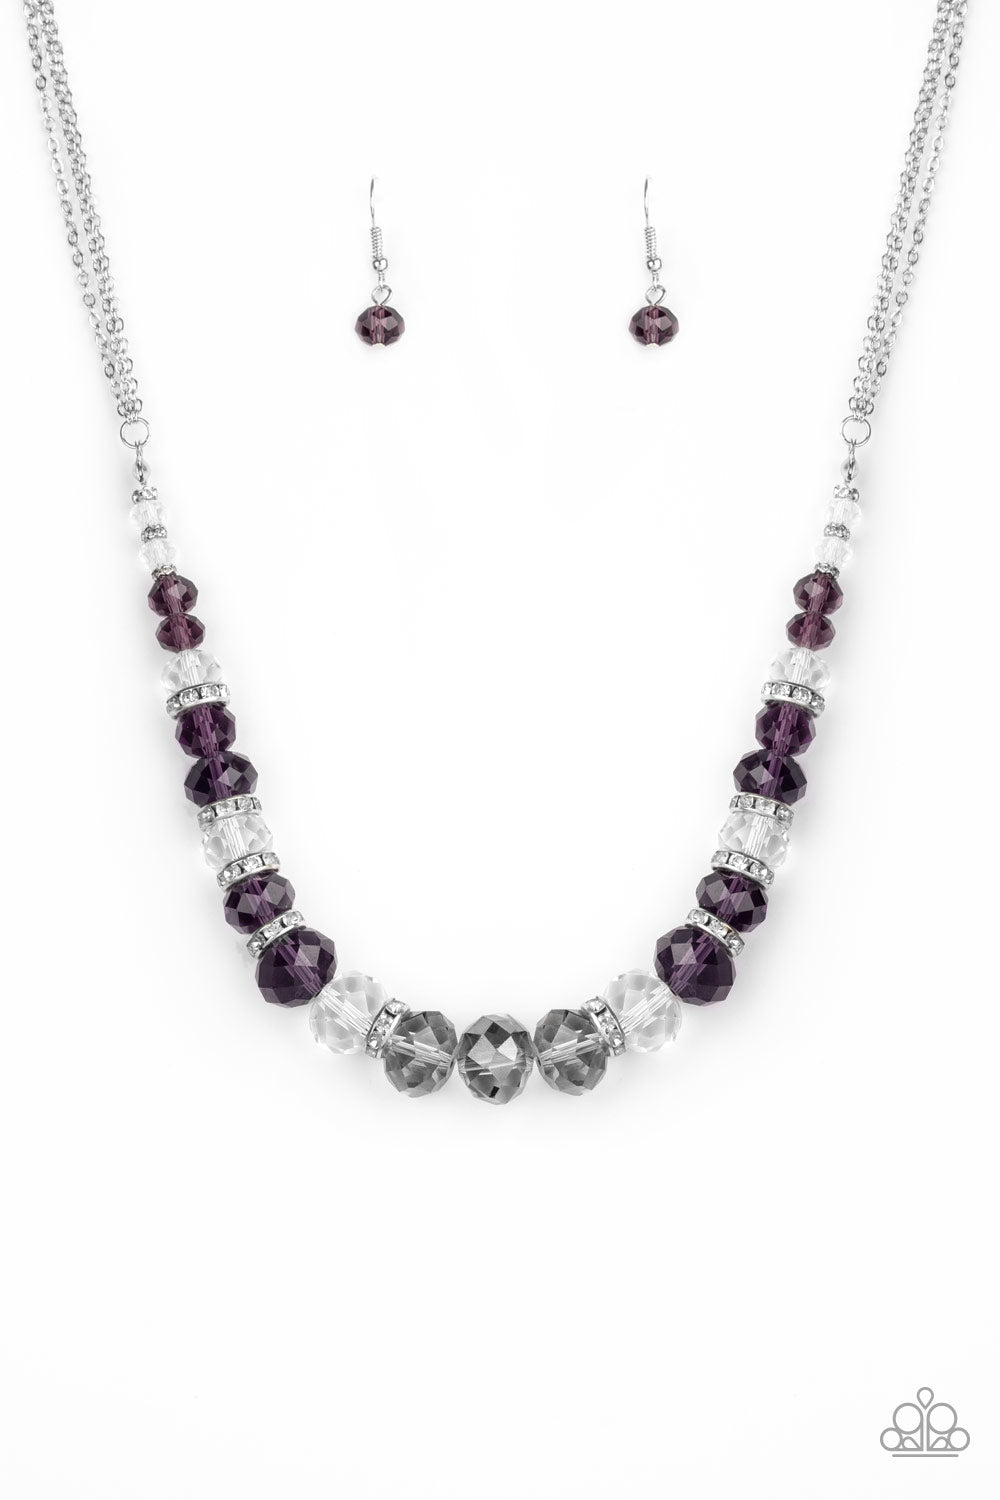 Distracted by Dazzle - Purple Item #N538 Attached to strands of shimmery silver chains, a glittery collection of purple, smoky, and white crystal-like gems and white rhinestone encrusted silver rings are threaded along an invisible wire below the collar for a glamorous finish. Features an adjustable clasp closure. All Paparazzi Accessories are lead free and nickel free!  Sold as one individual necklace. Includes one pair of matching earrings.